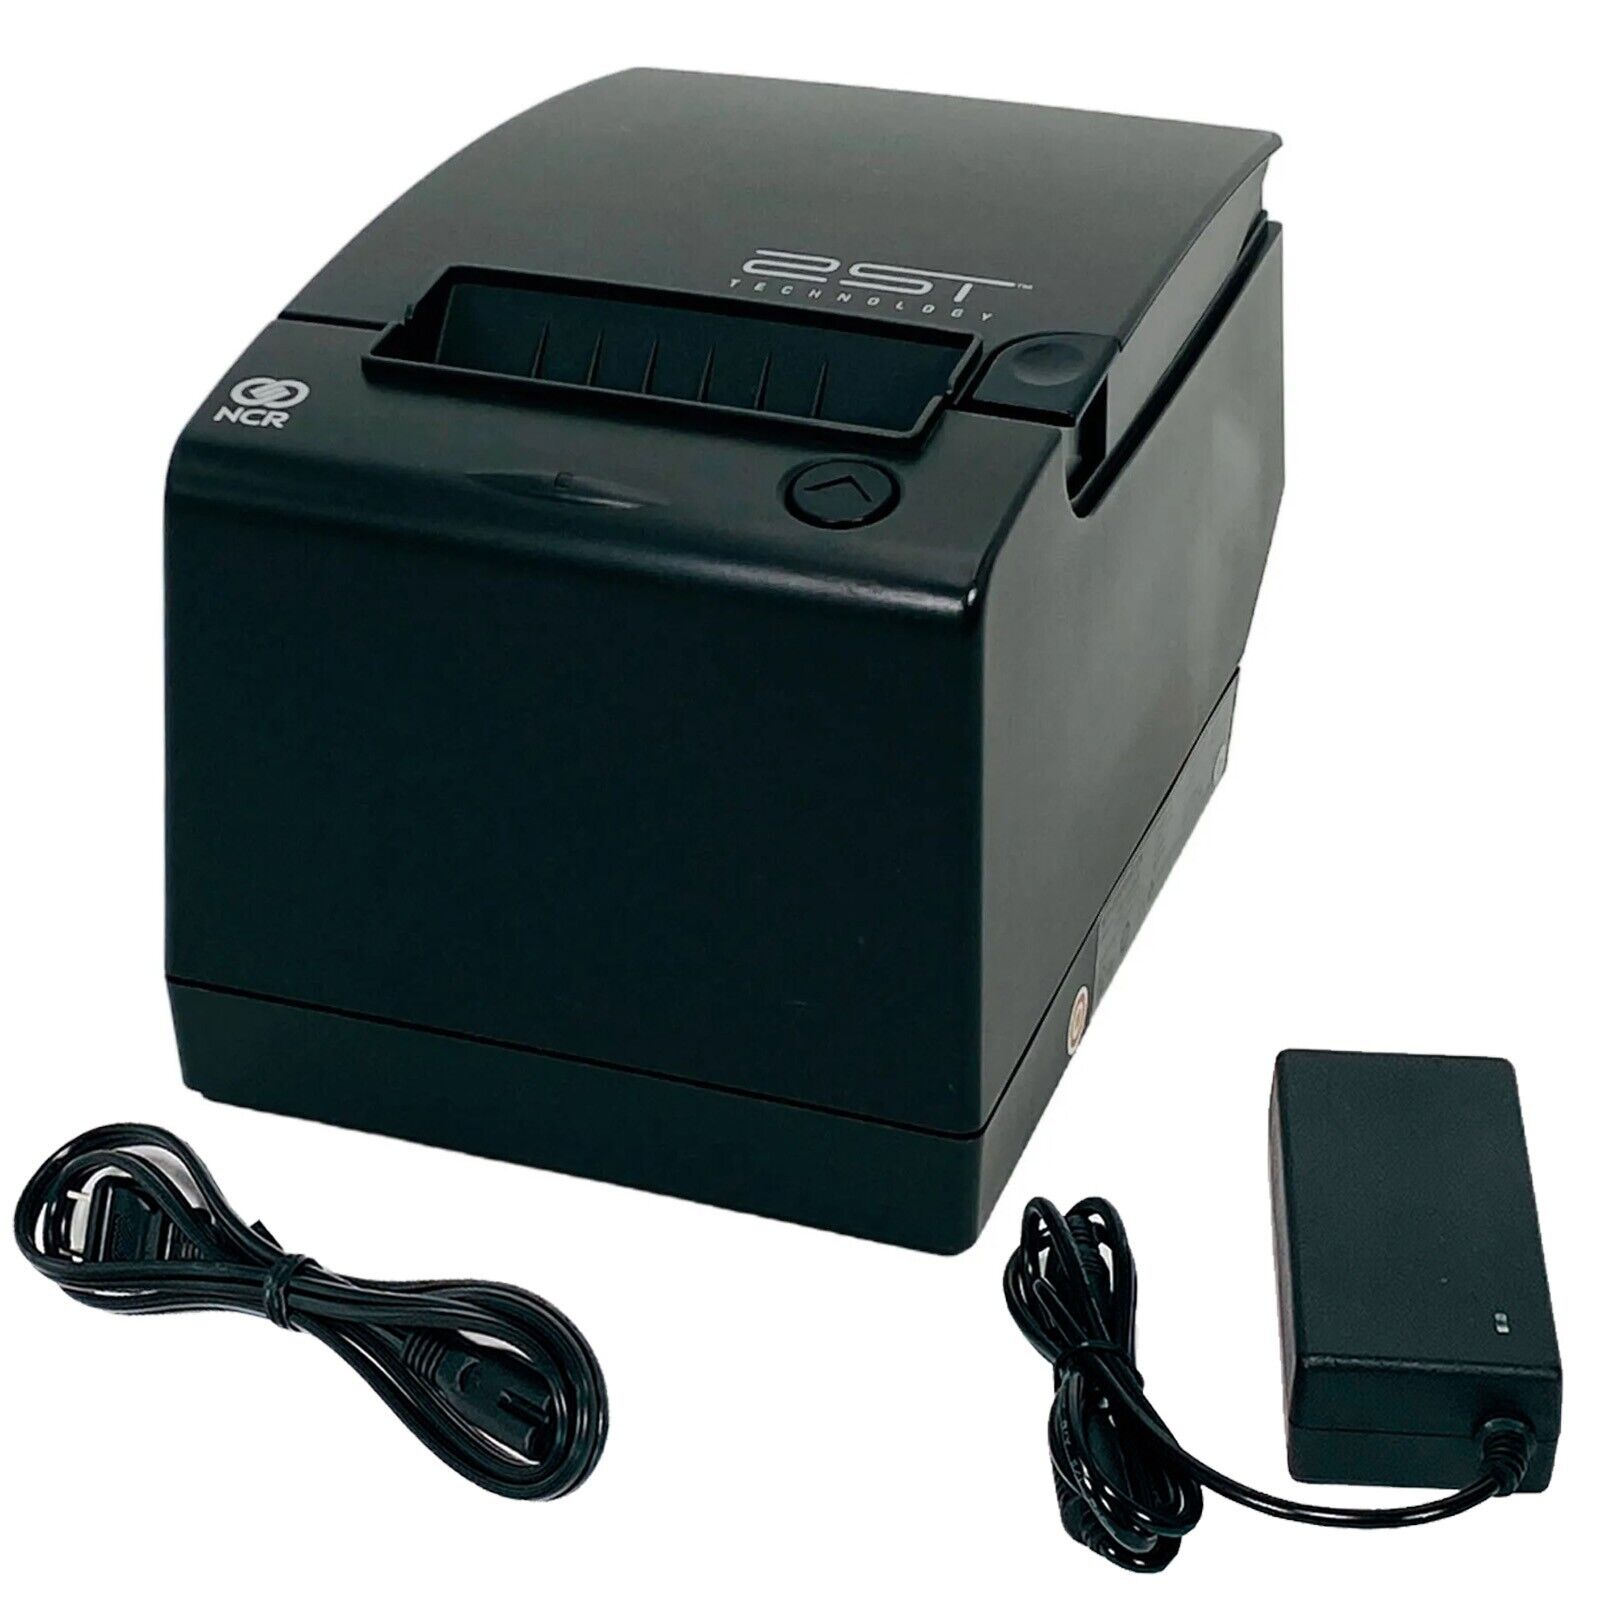 NCR 7198-2003-9001 POS Receipt Printer for works with Square Clover Toast